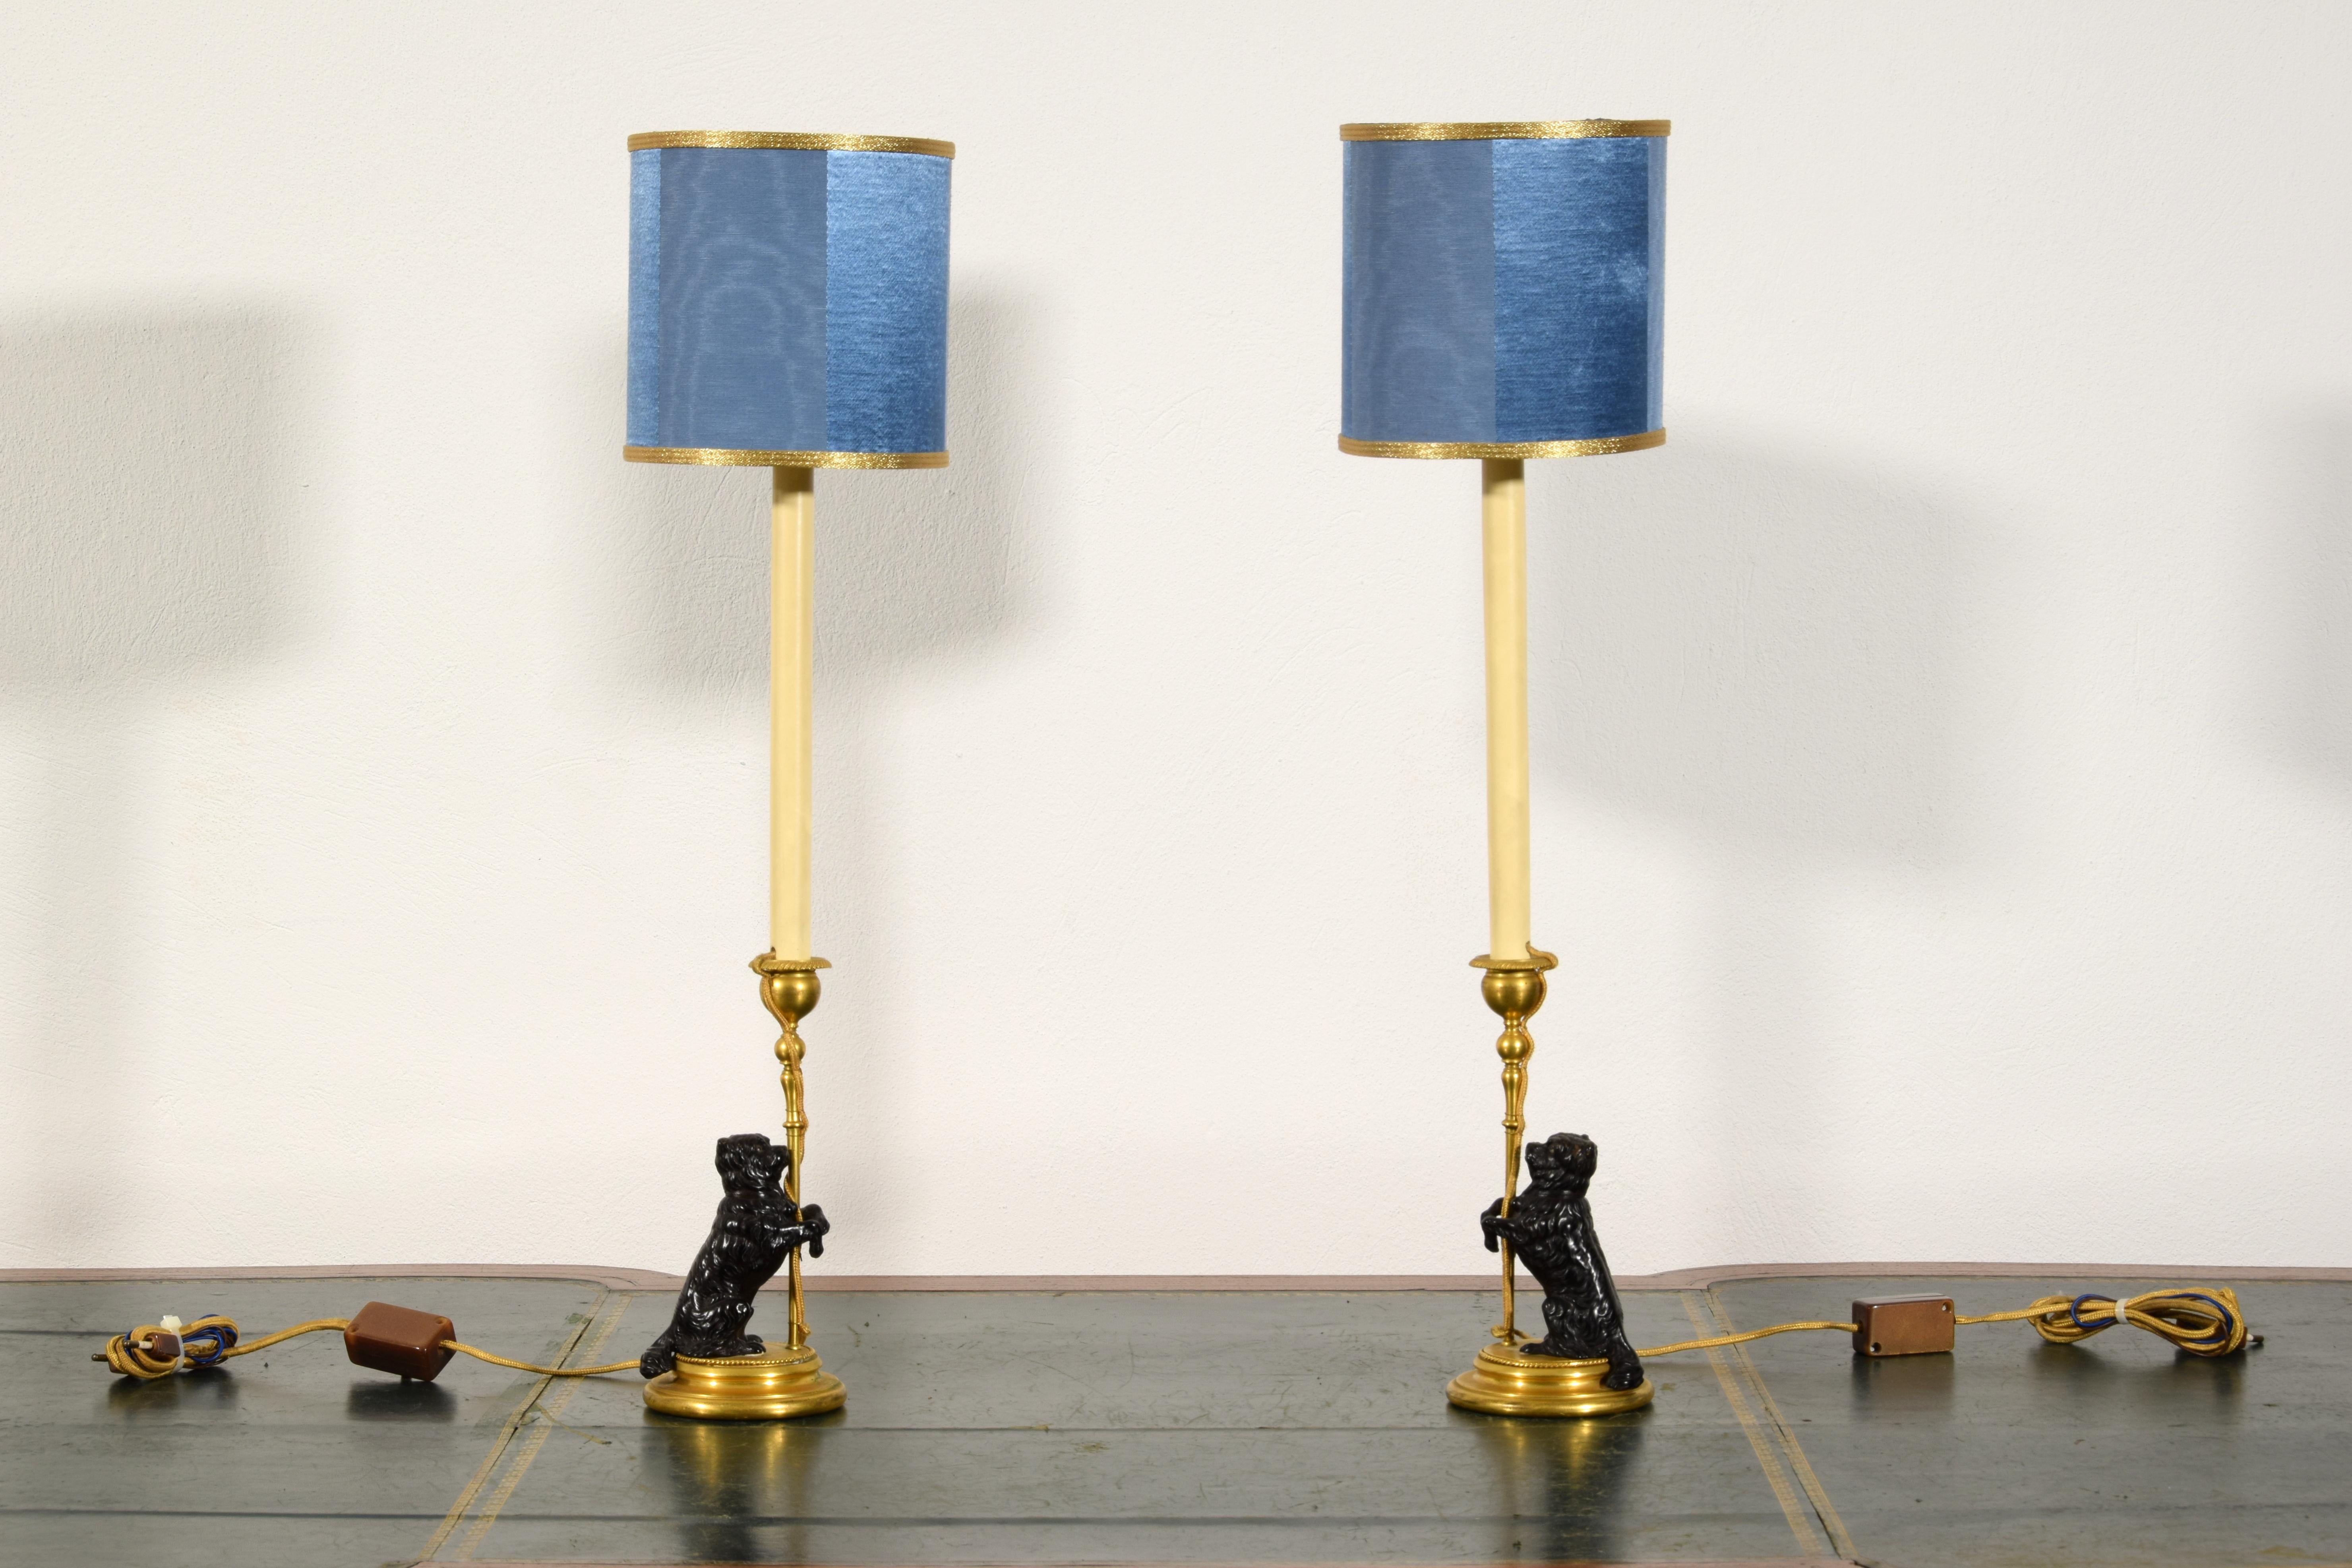 19th Century, Pair of Frech Gilt and Burnished Bronze Candlesticks with dogs

Measurements: cm H 61,5 x base diameter 10; H candlestick without lamp holder cm 21,5; lampshade diameter cm 16 x H 16

The pair of candlesticks was made of gilded bronze